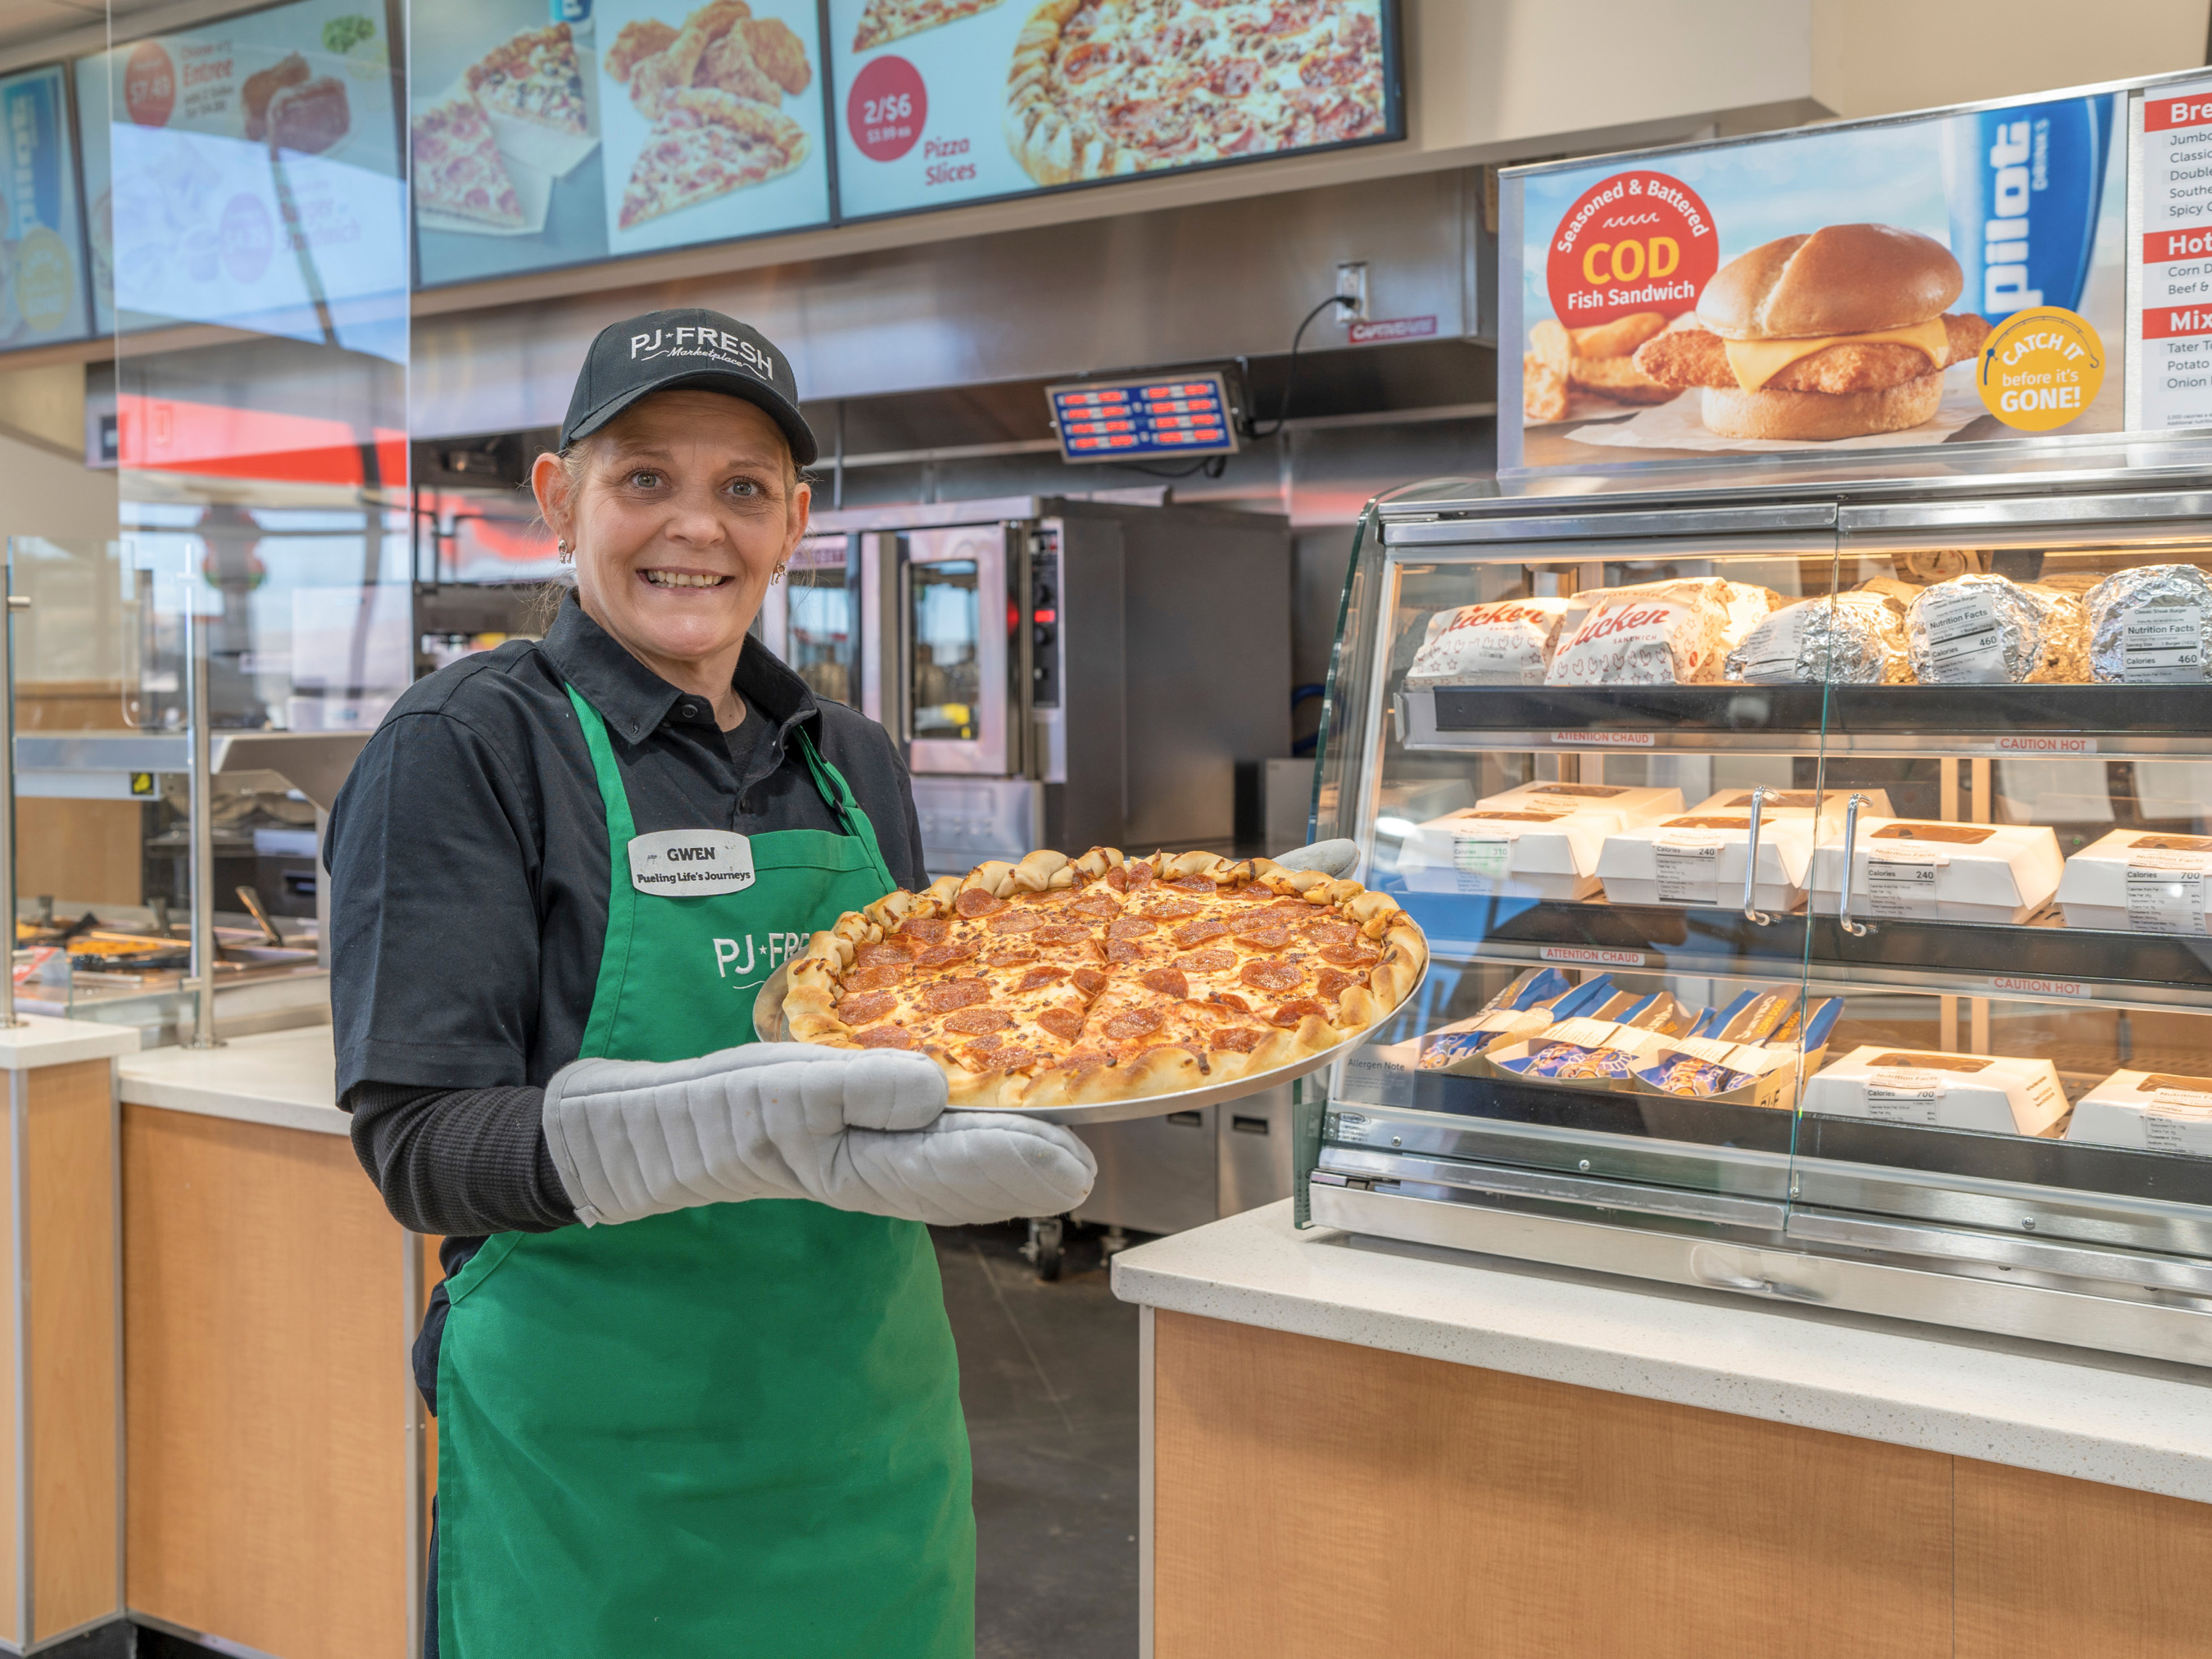 Pilot’s signature hot meals and pizza that are made fresh daily will be available at hundreds of additional travel centers to provide guests with a greater selection of foods for every occasion.